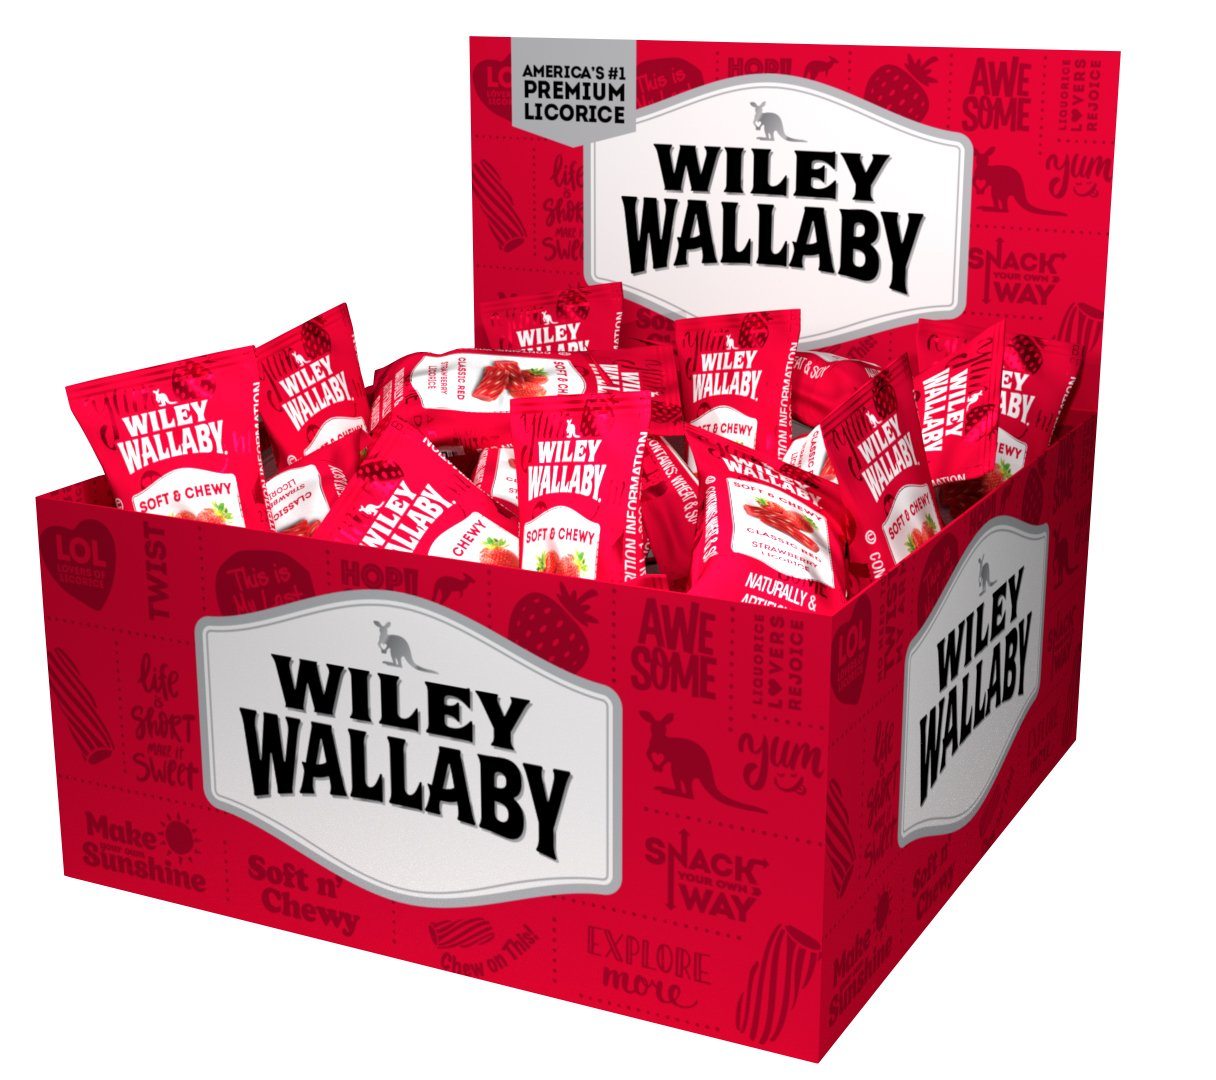 Wiley Wallaby Licorice Wiley Wallaby Original Red 0.28 Oz-50 Count 